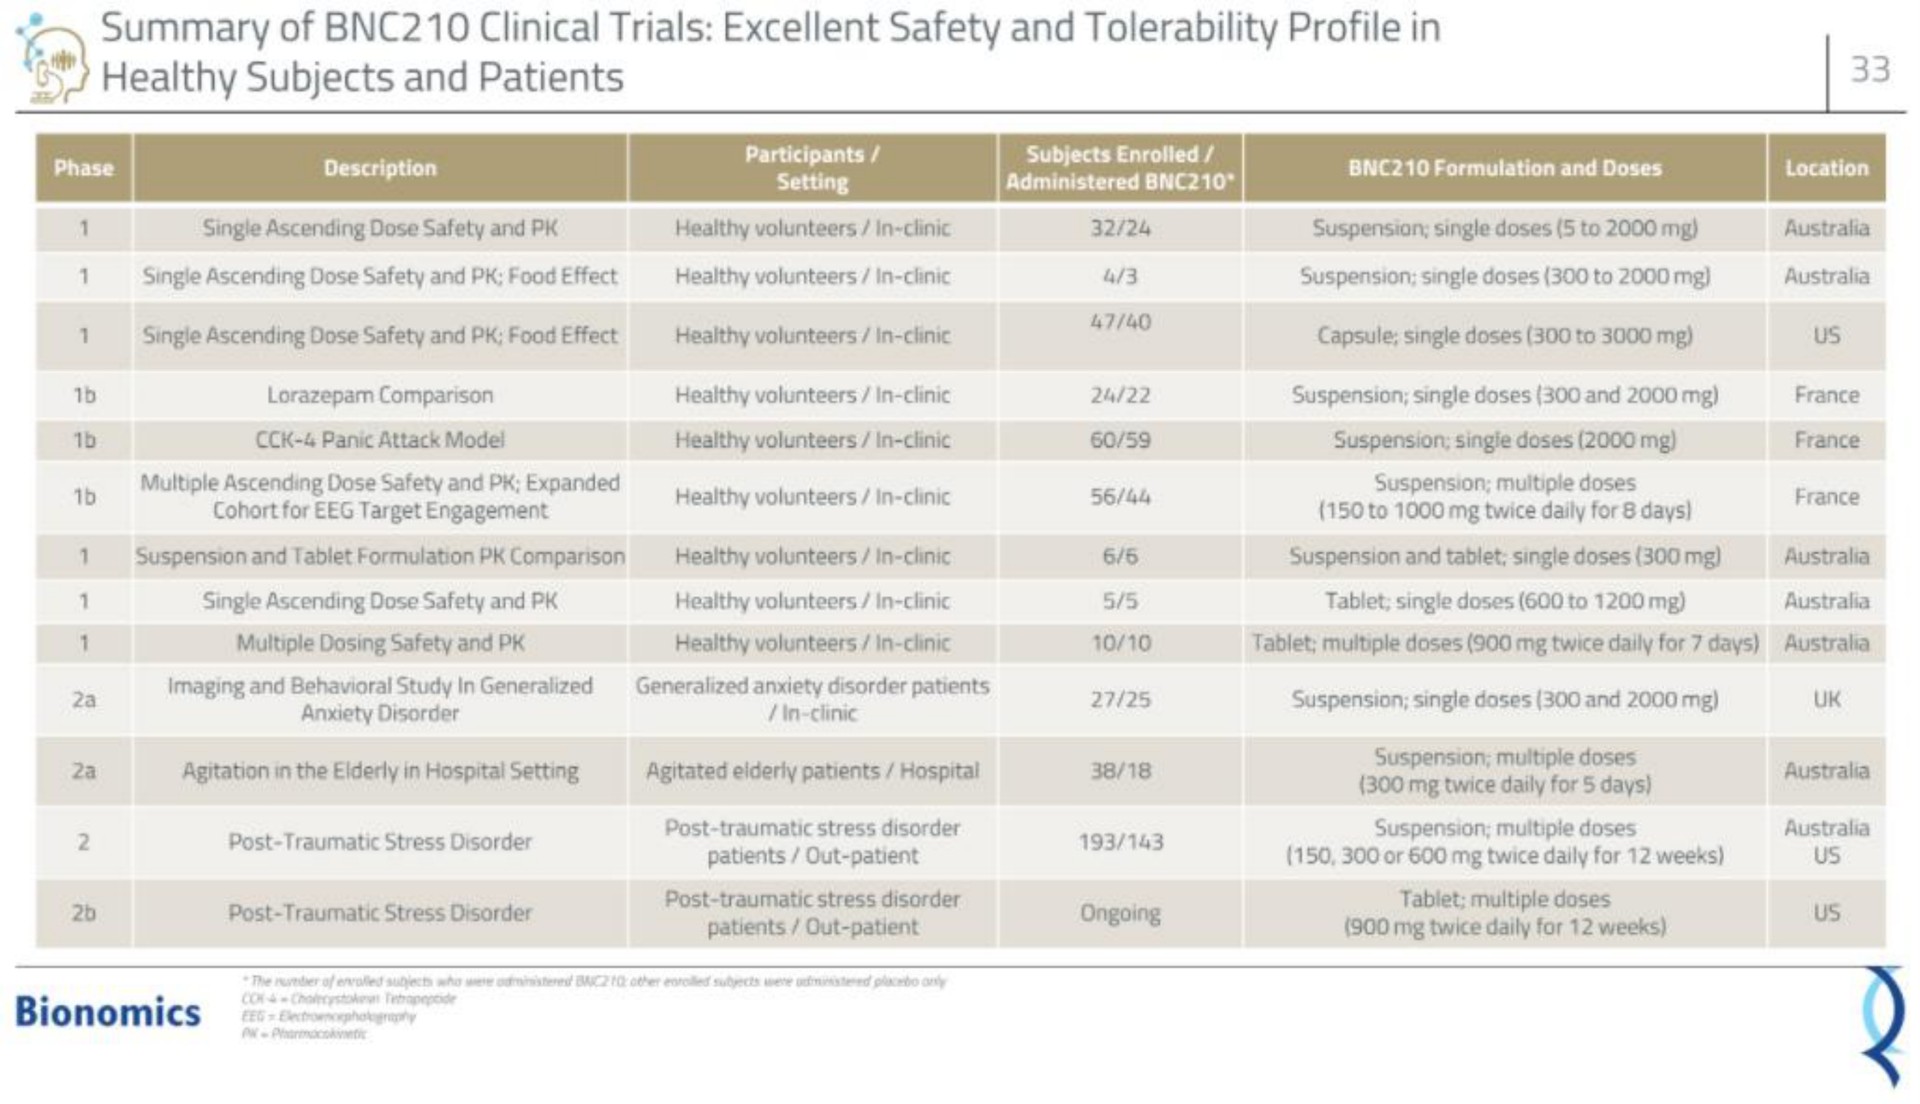 summary of clinical trials excellent safety and tolerability profile in healthy subjects and patients a | Bionomics